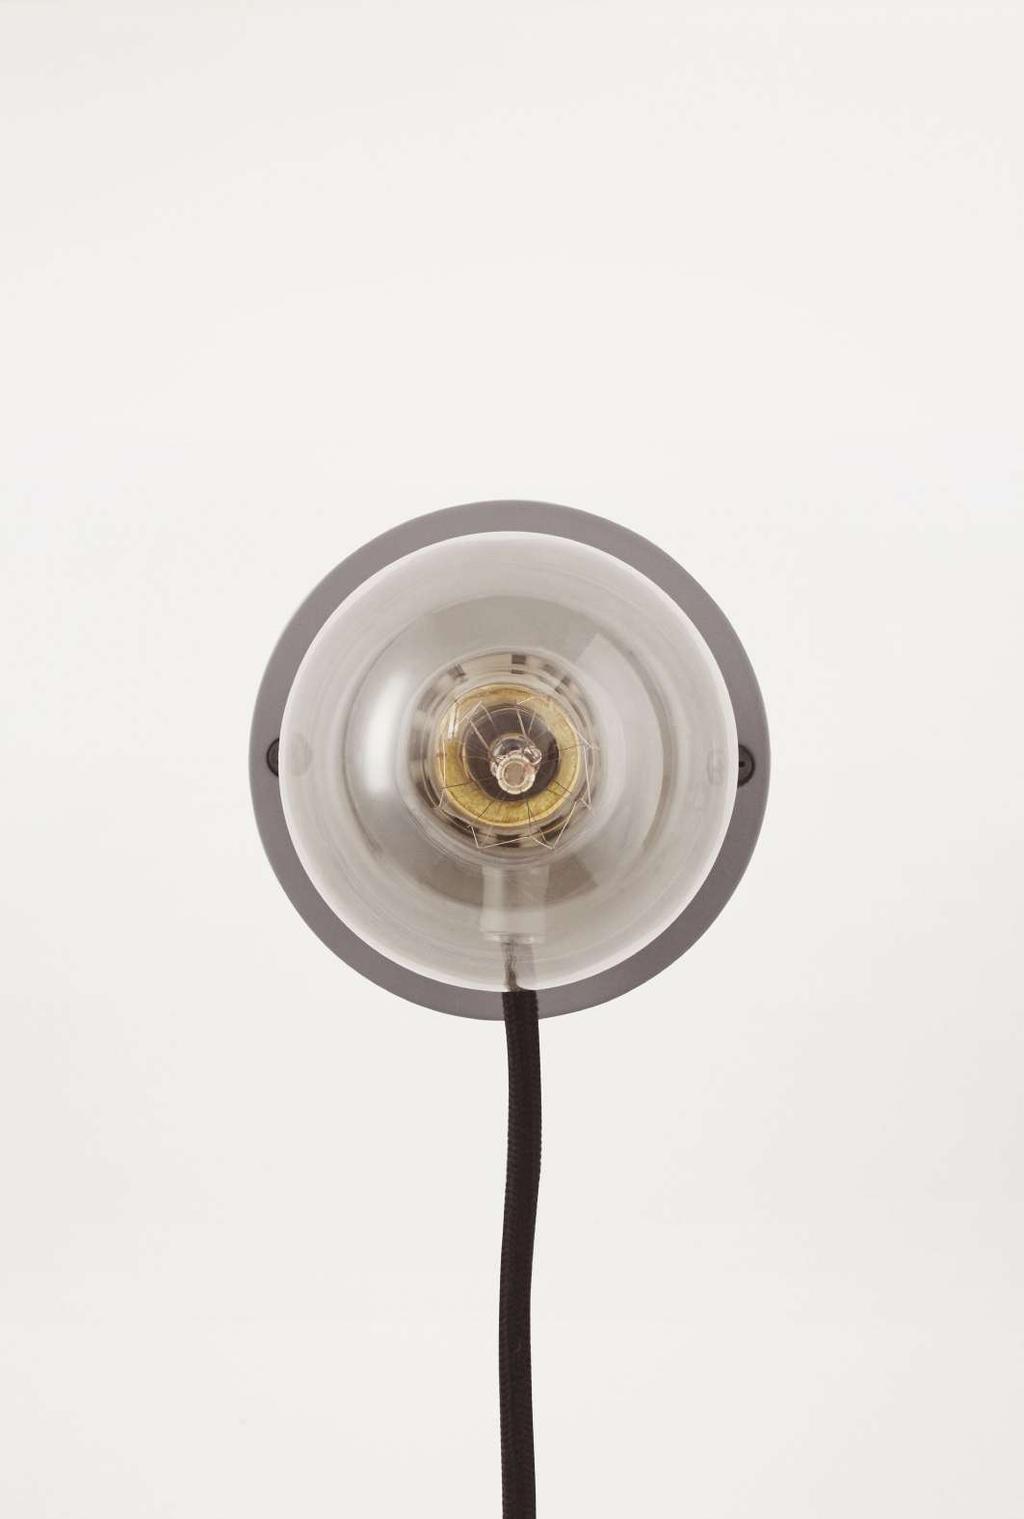 Ø100 / Ø250 72 E27 WALL LIGHT Design Frama Year 2015 Typology Collection Origin Material E27 wall lights Permanent lighting PRC Painted steel, electroplated; brass, bronze, copper 2500mm textile cord